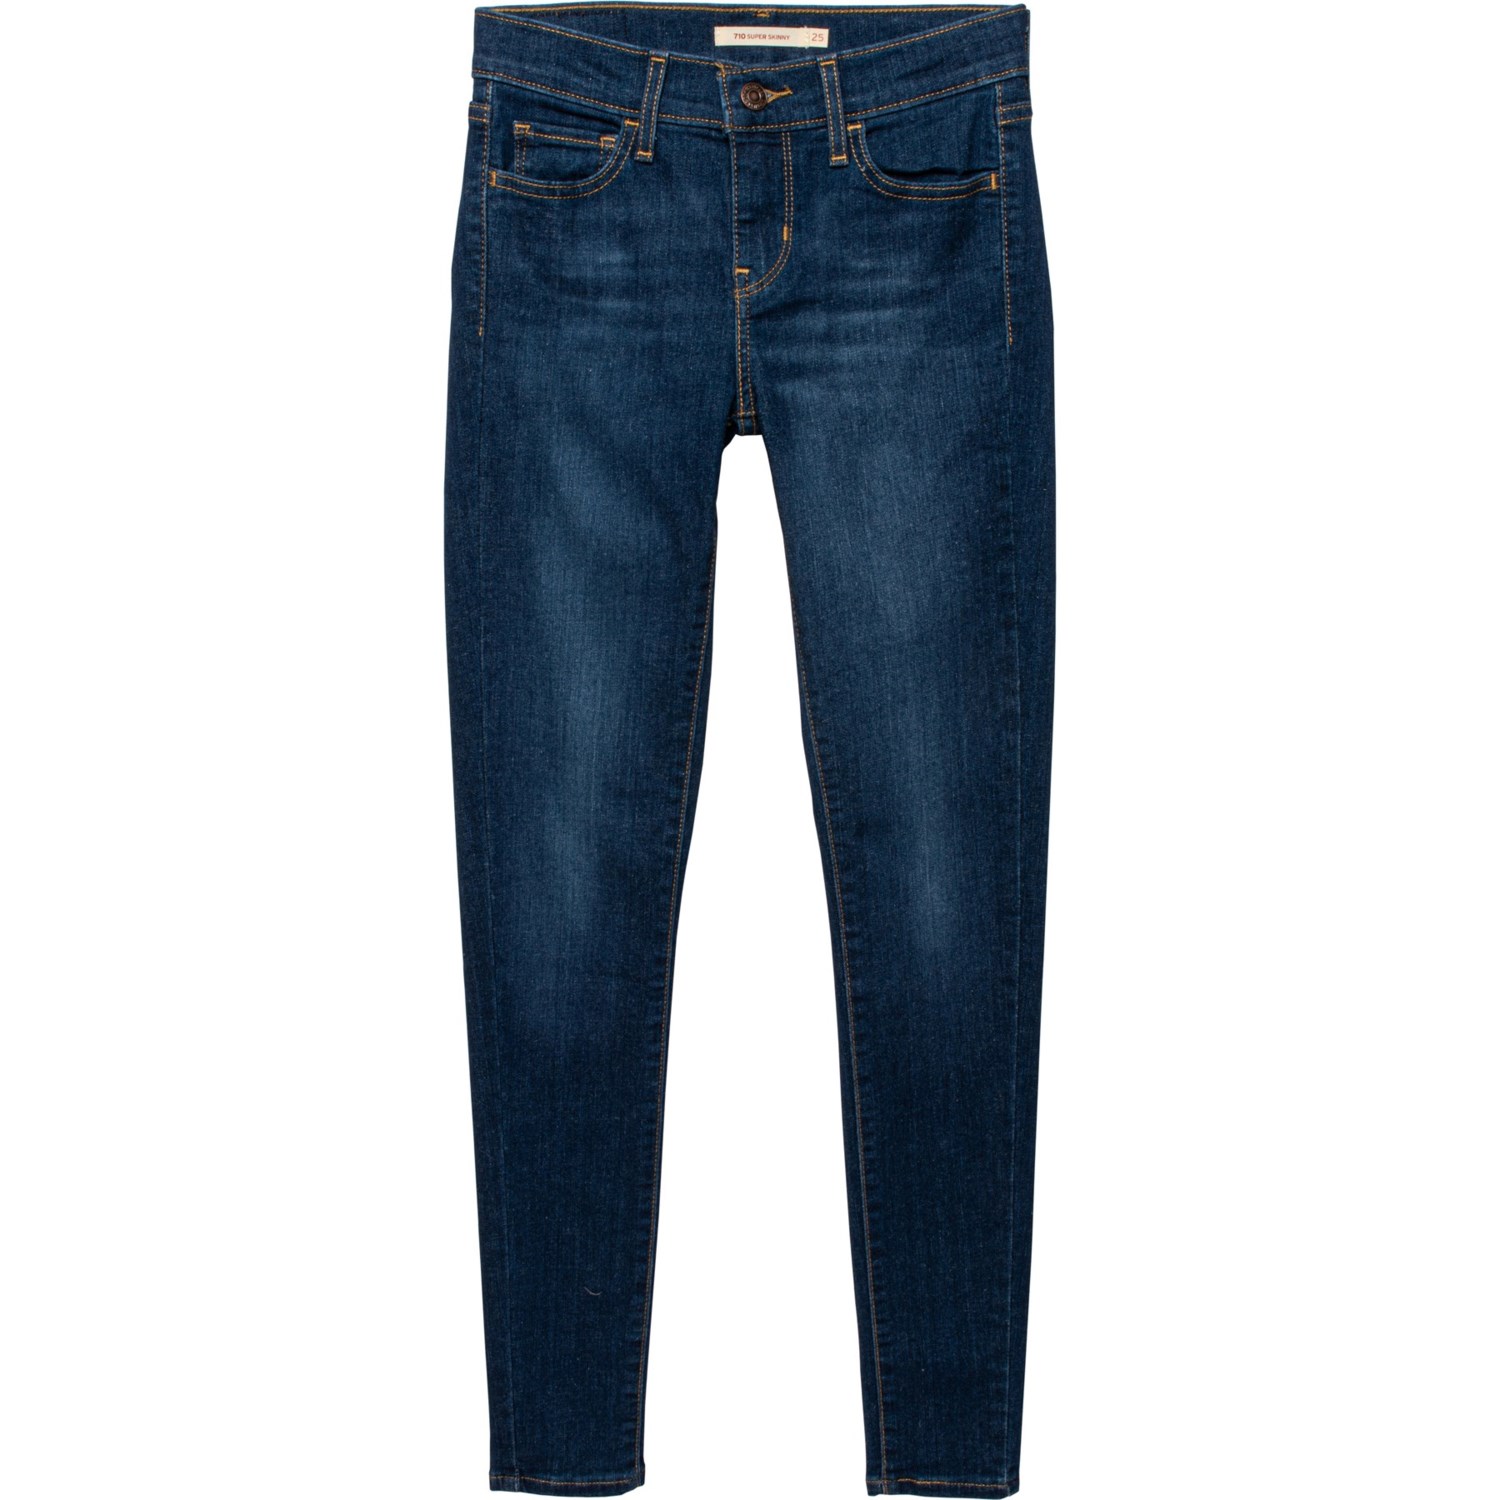 Levis 710 Toronto Sights Super Skinny Jeans - Mid Rise (For Women)